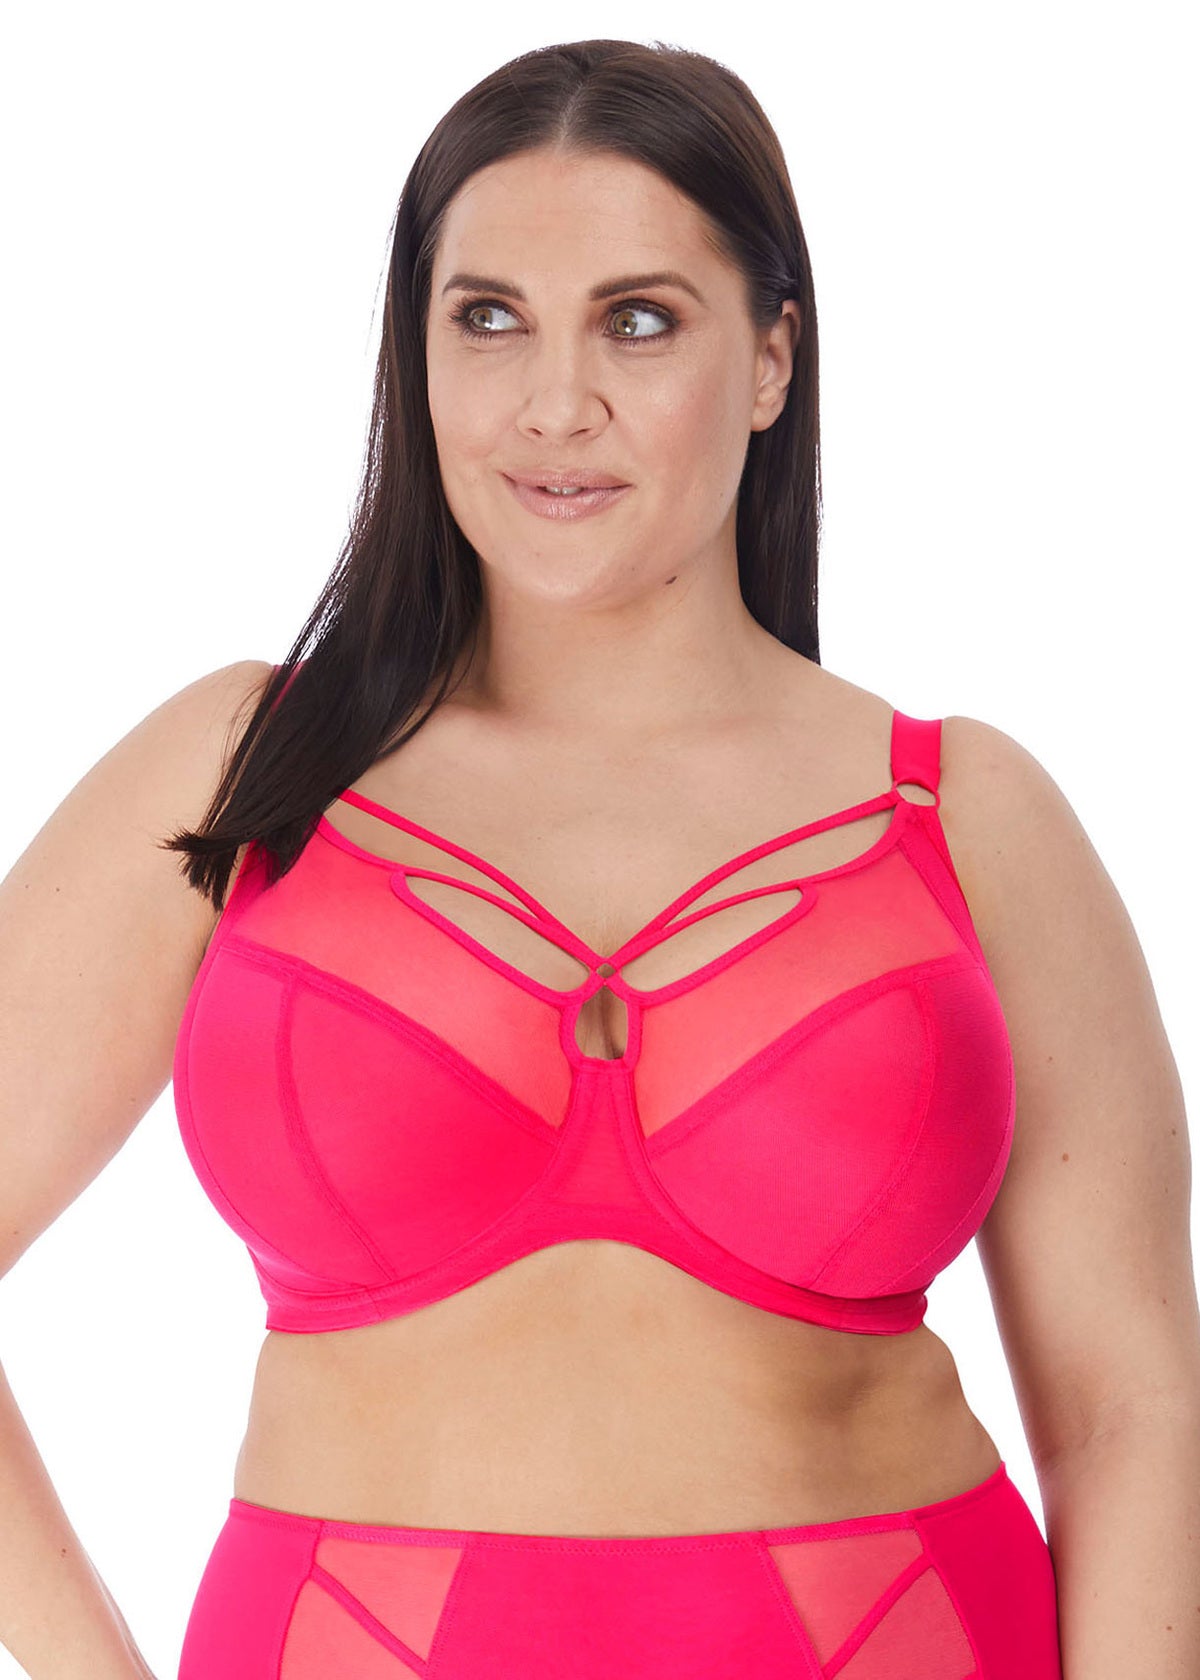 Shop D–K Cup Bras, Lingerie and Swimwear at Brava in Sydney